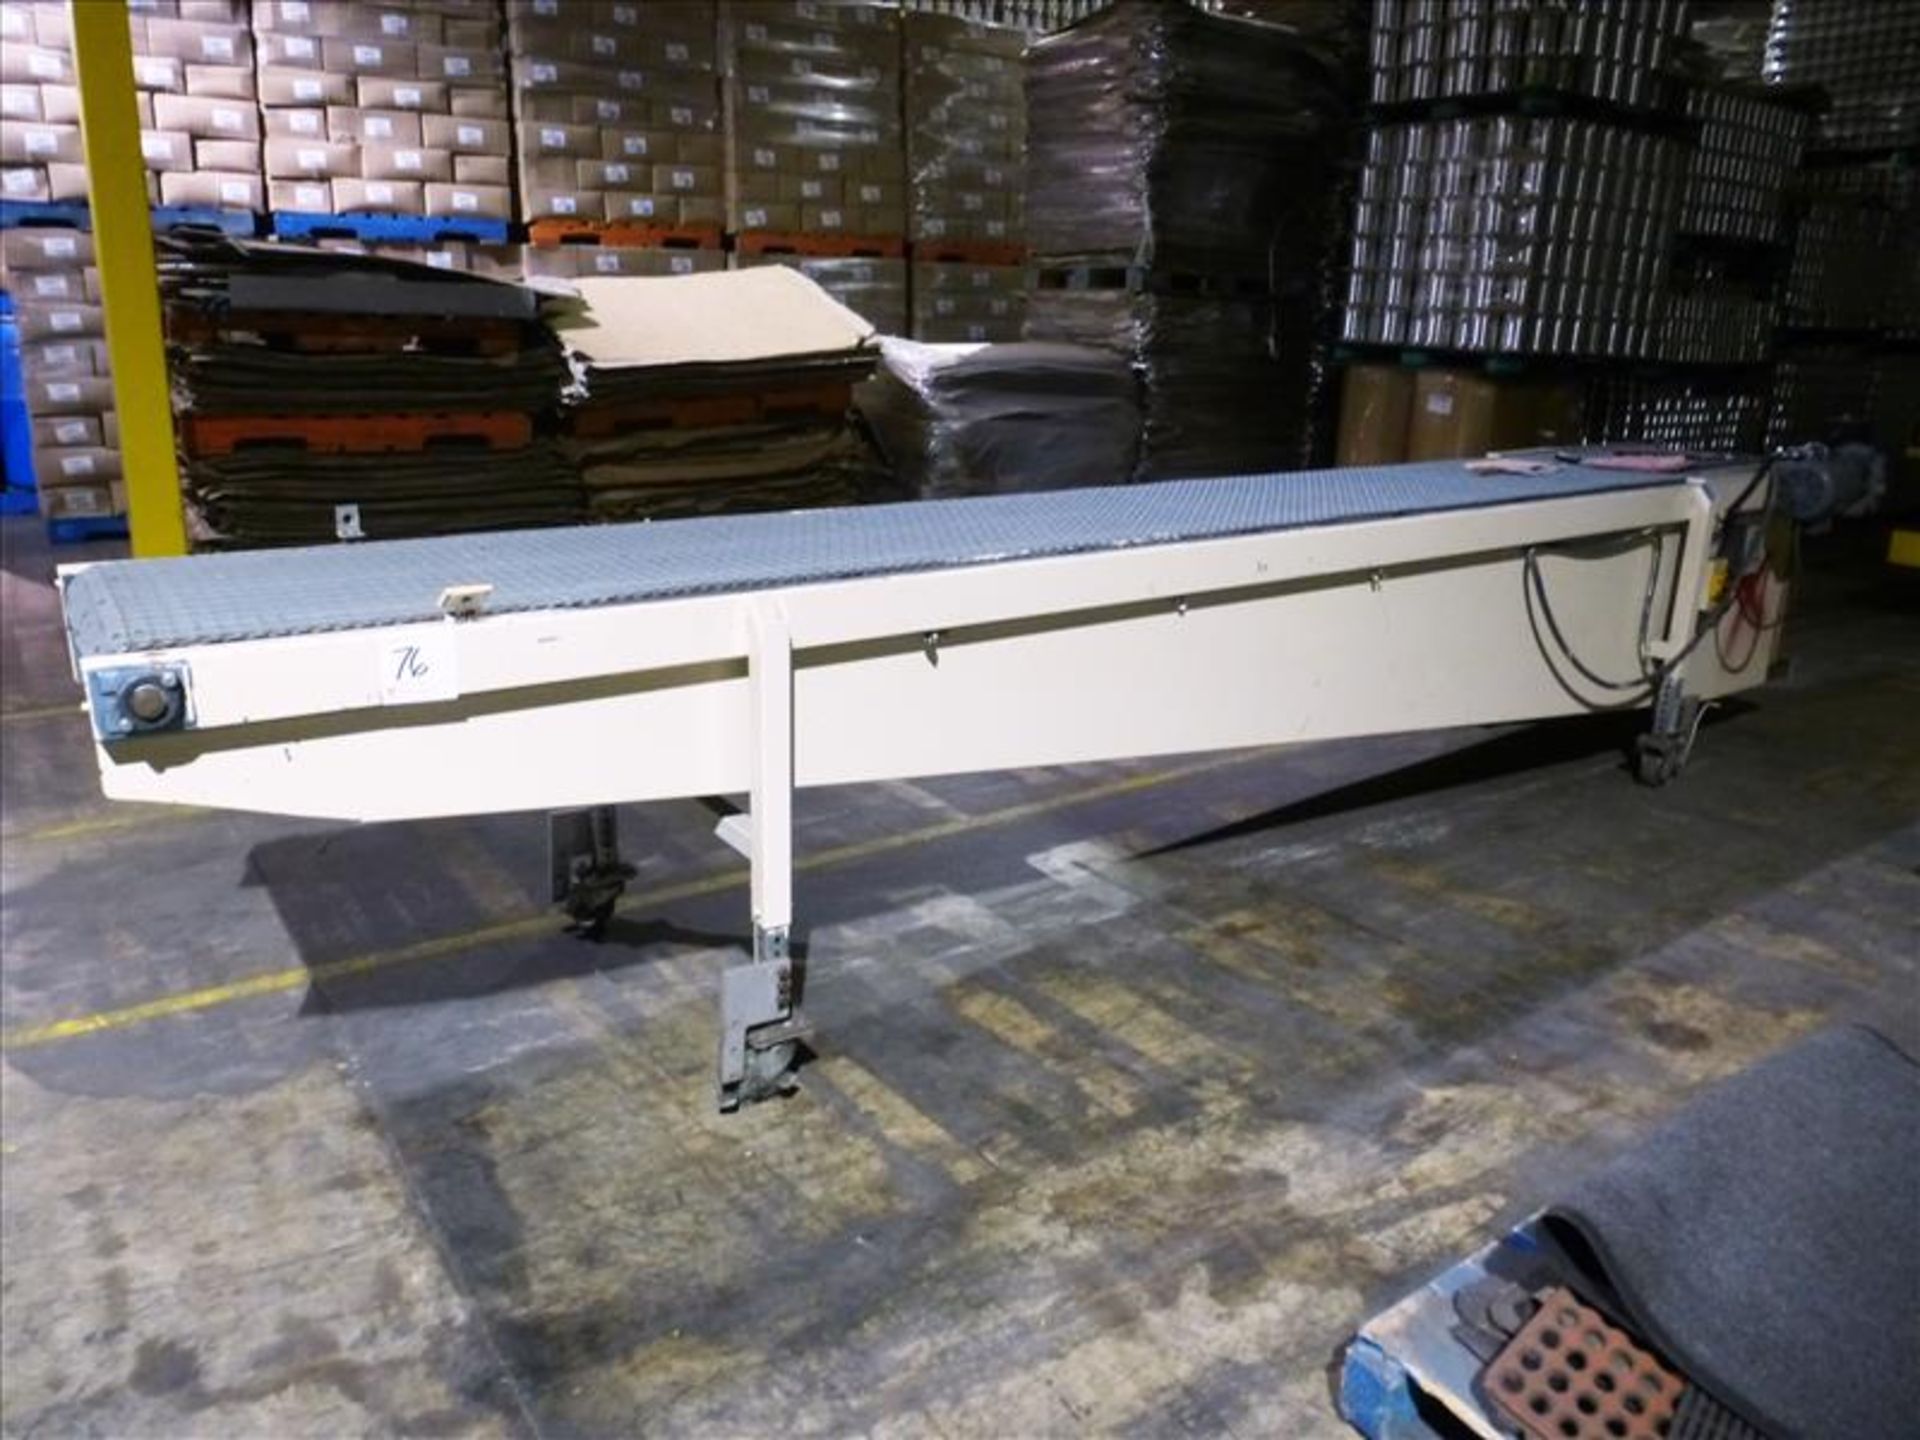 variable speed chain belt conveyor on casters, approx. 15' long x 2' wide c/w Leeson variable